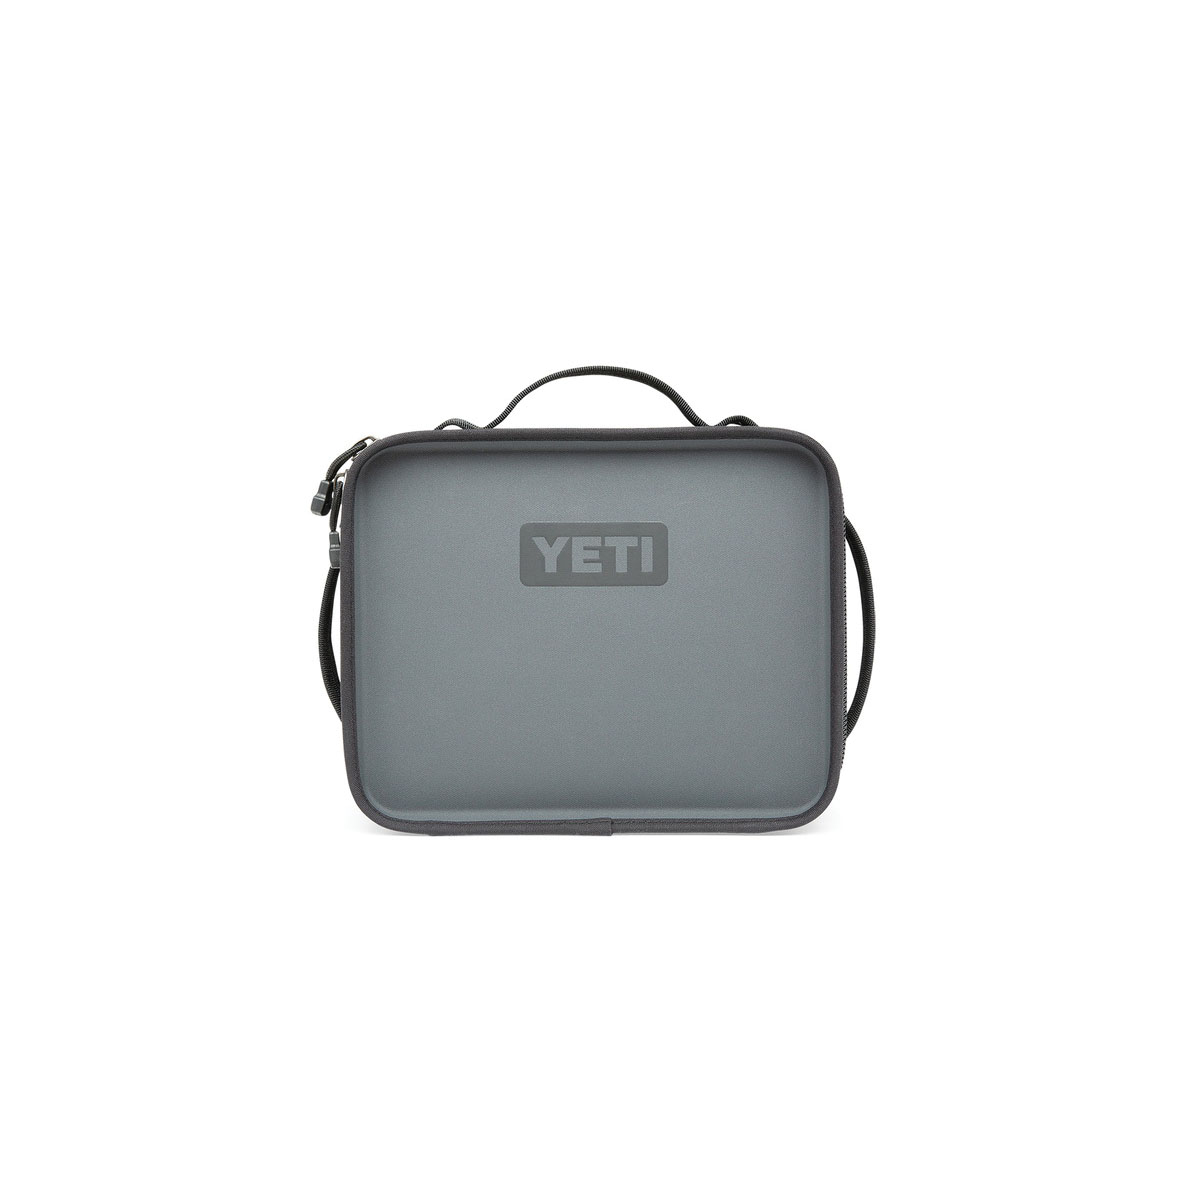 Yeti Daytrip Lunch Box - BEST LUNCH BOX FOR MEN AND WOMEN 